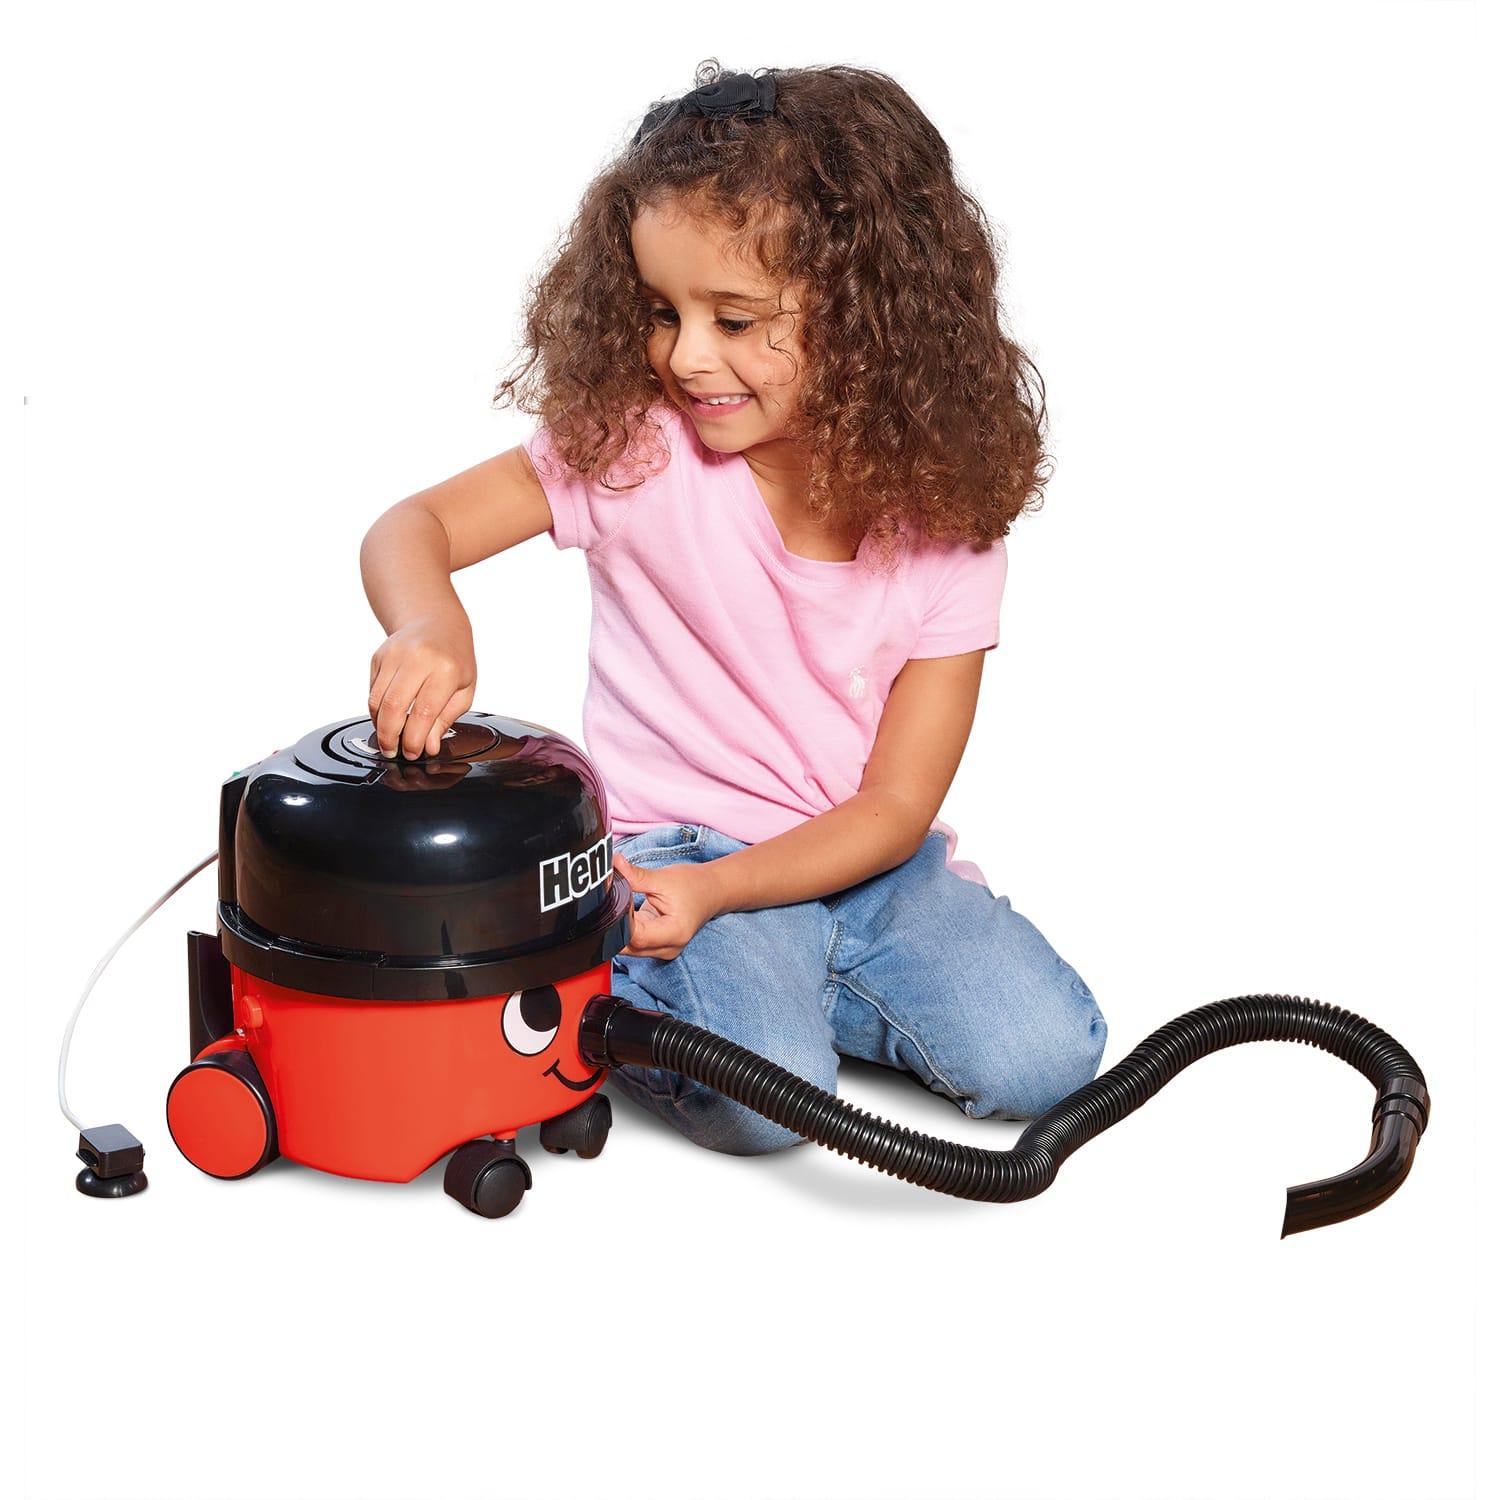 henry hoover cleaning set